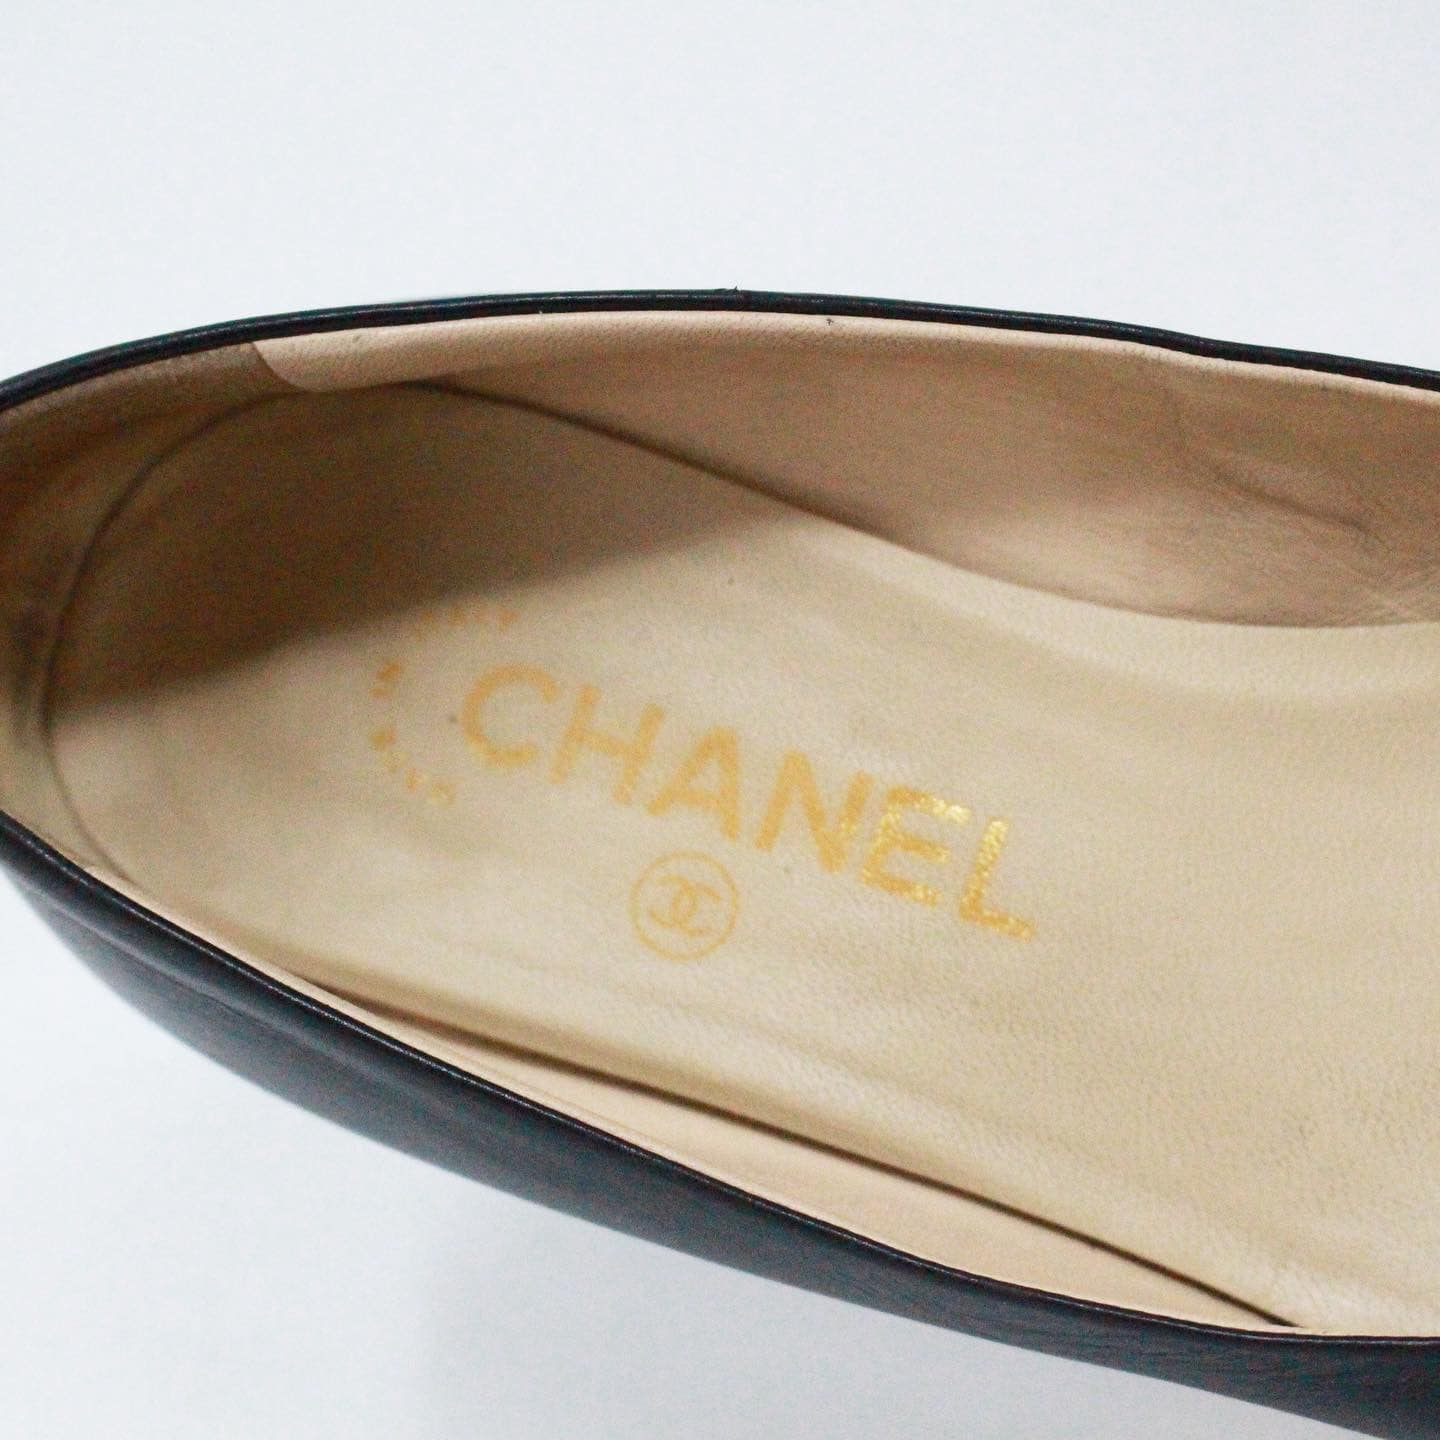 chanel shoes us